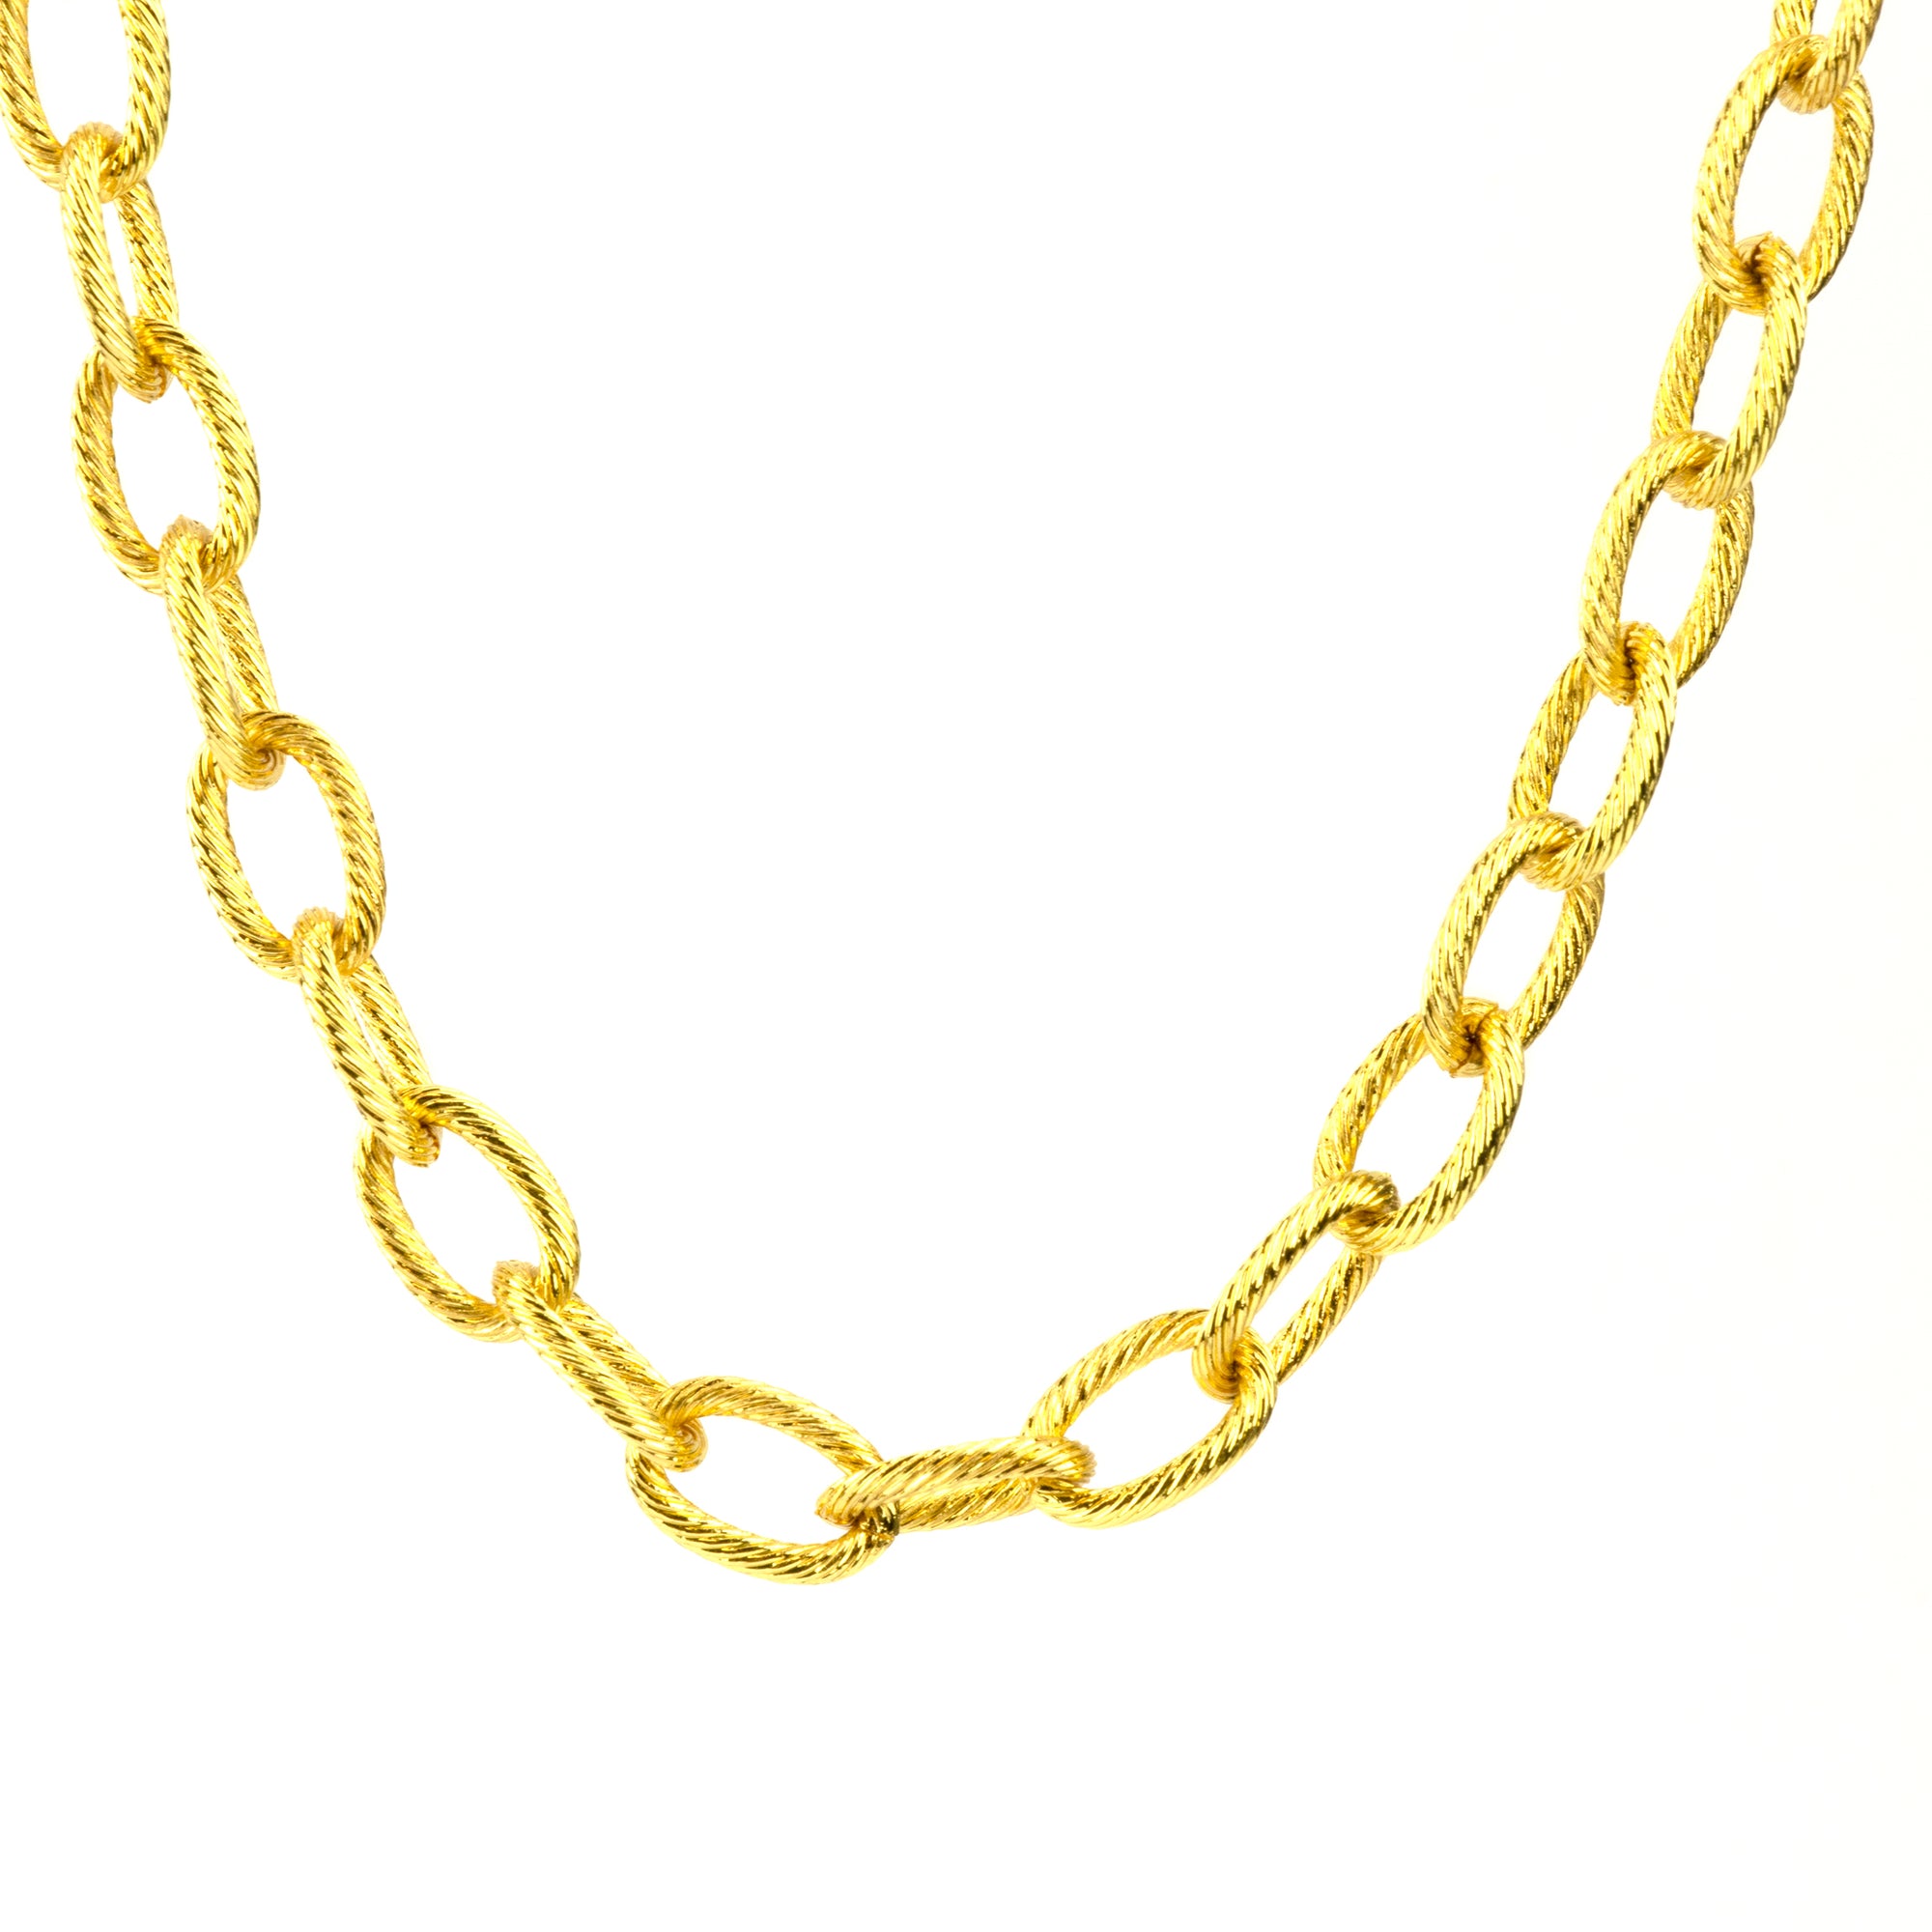 Gold Eyeglass/Mask Chain w/ Pave Clasp